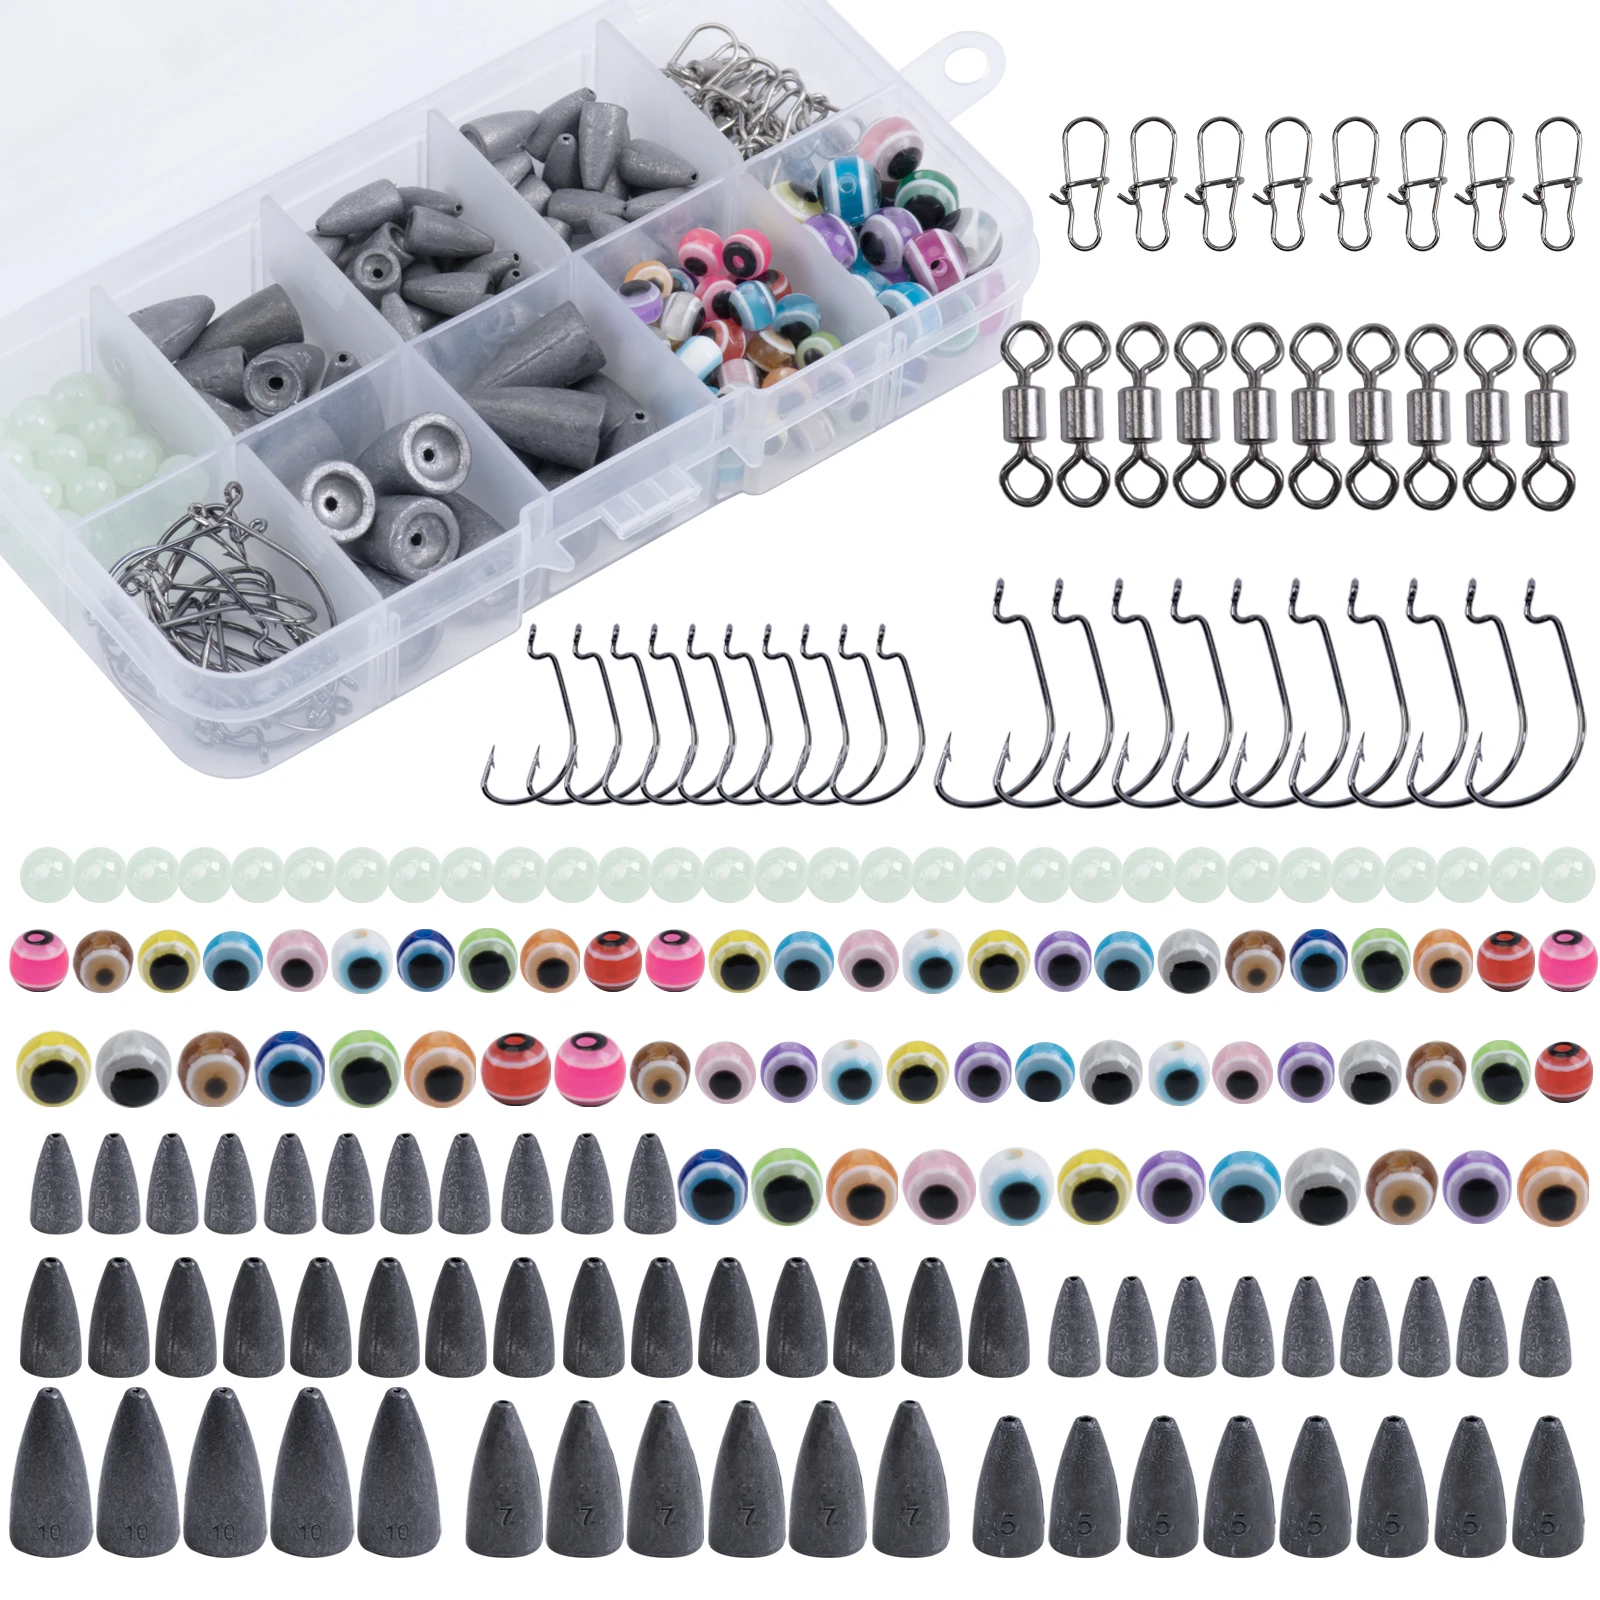 

Goture 182pcs/box Fishing Bait Tackle Group Including Fishing Weights Sinkers Lure Fishing Beads Bullet Sinkers Accessories Kit